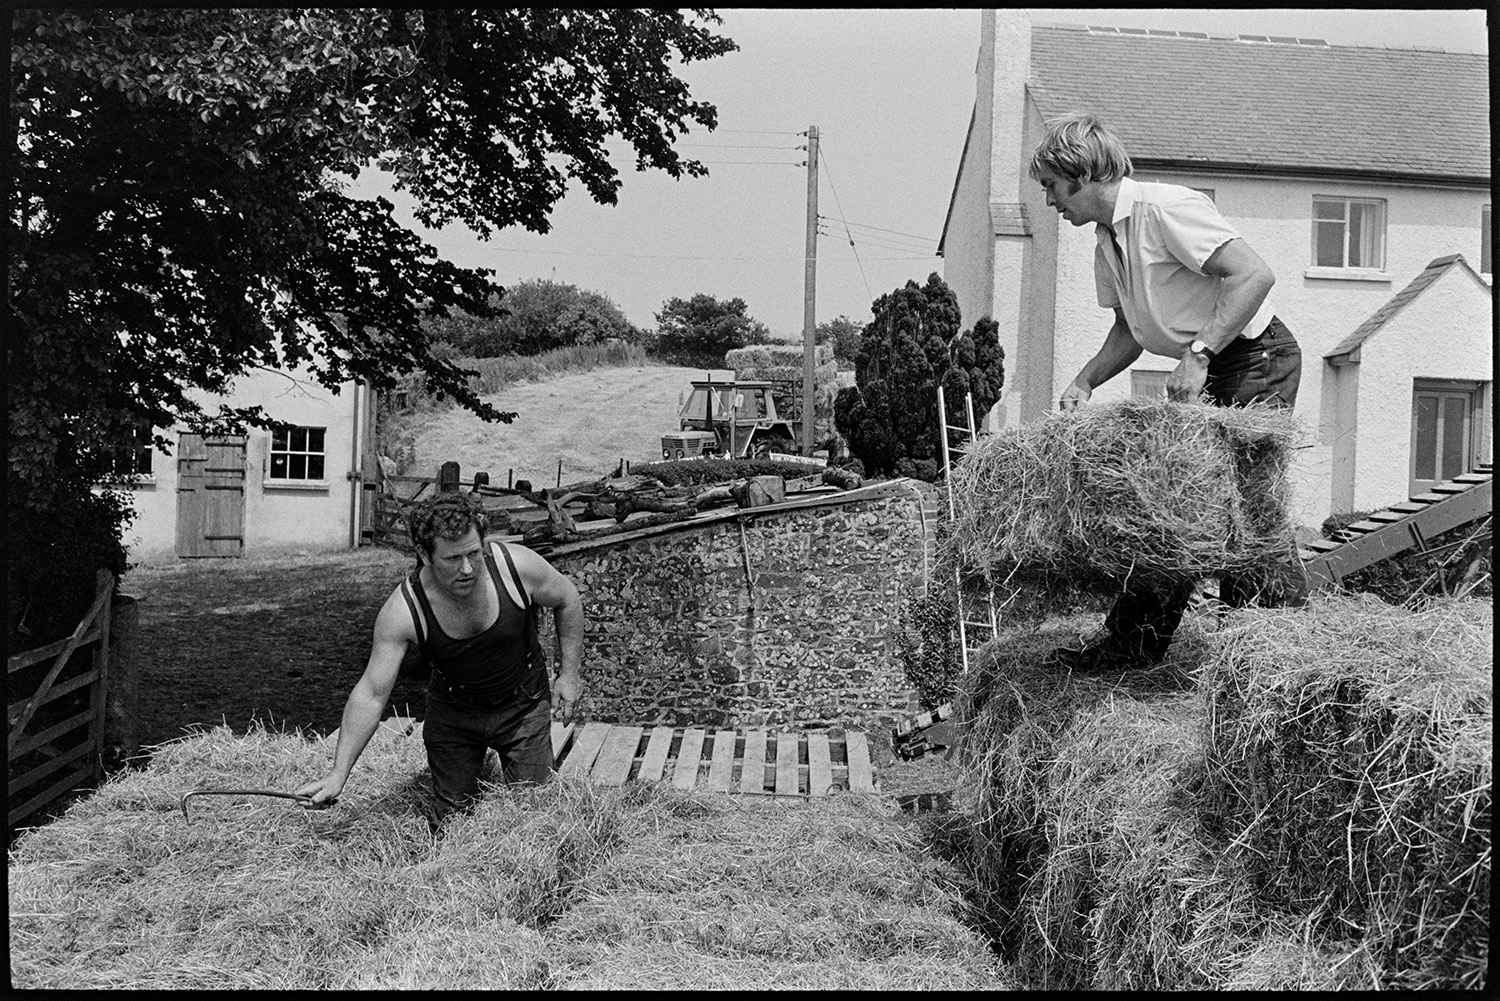 Men loading hay bales. 
[Two men loading hay bales onto a trailer in Hatherleigh. A house and tractor are visible in the background.]